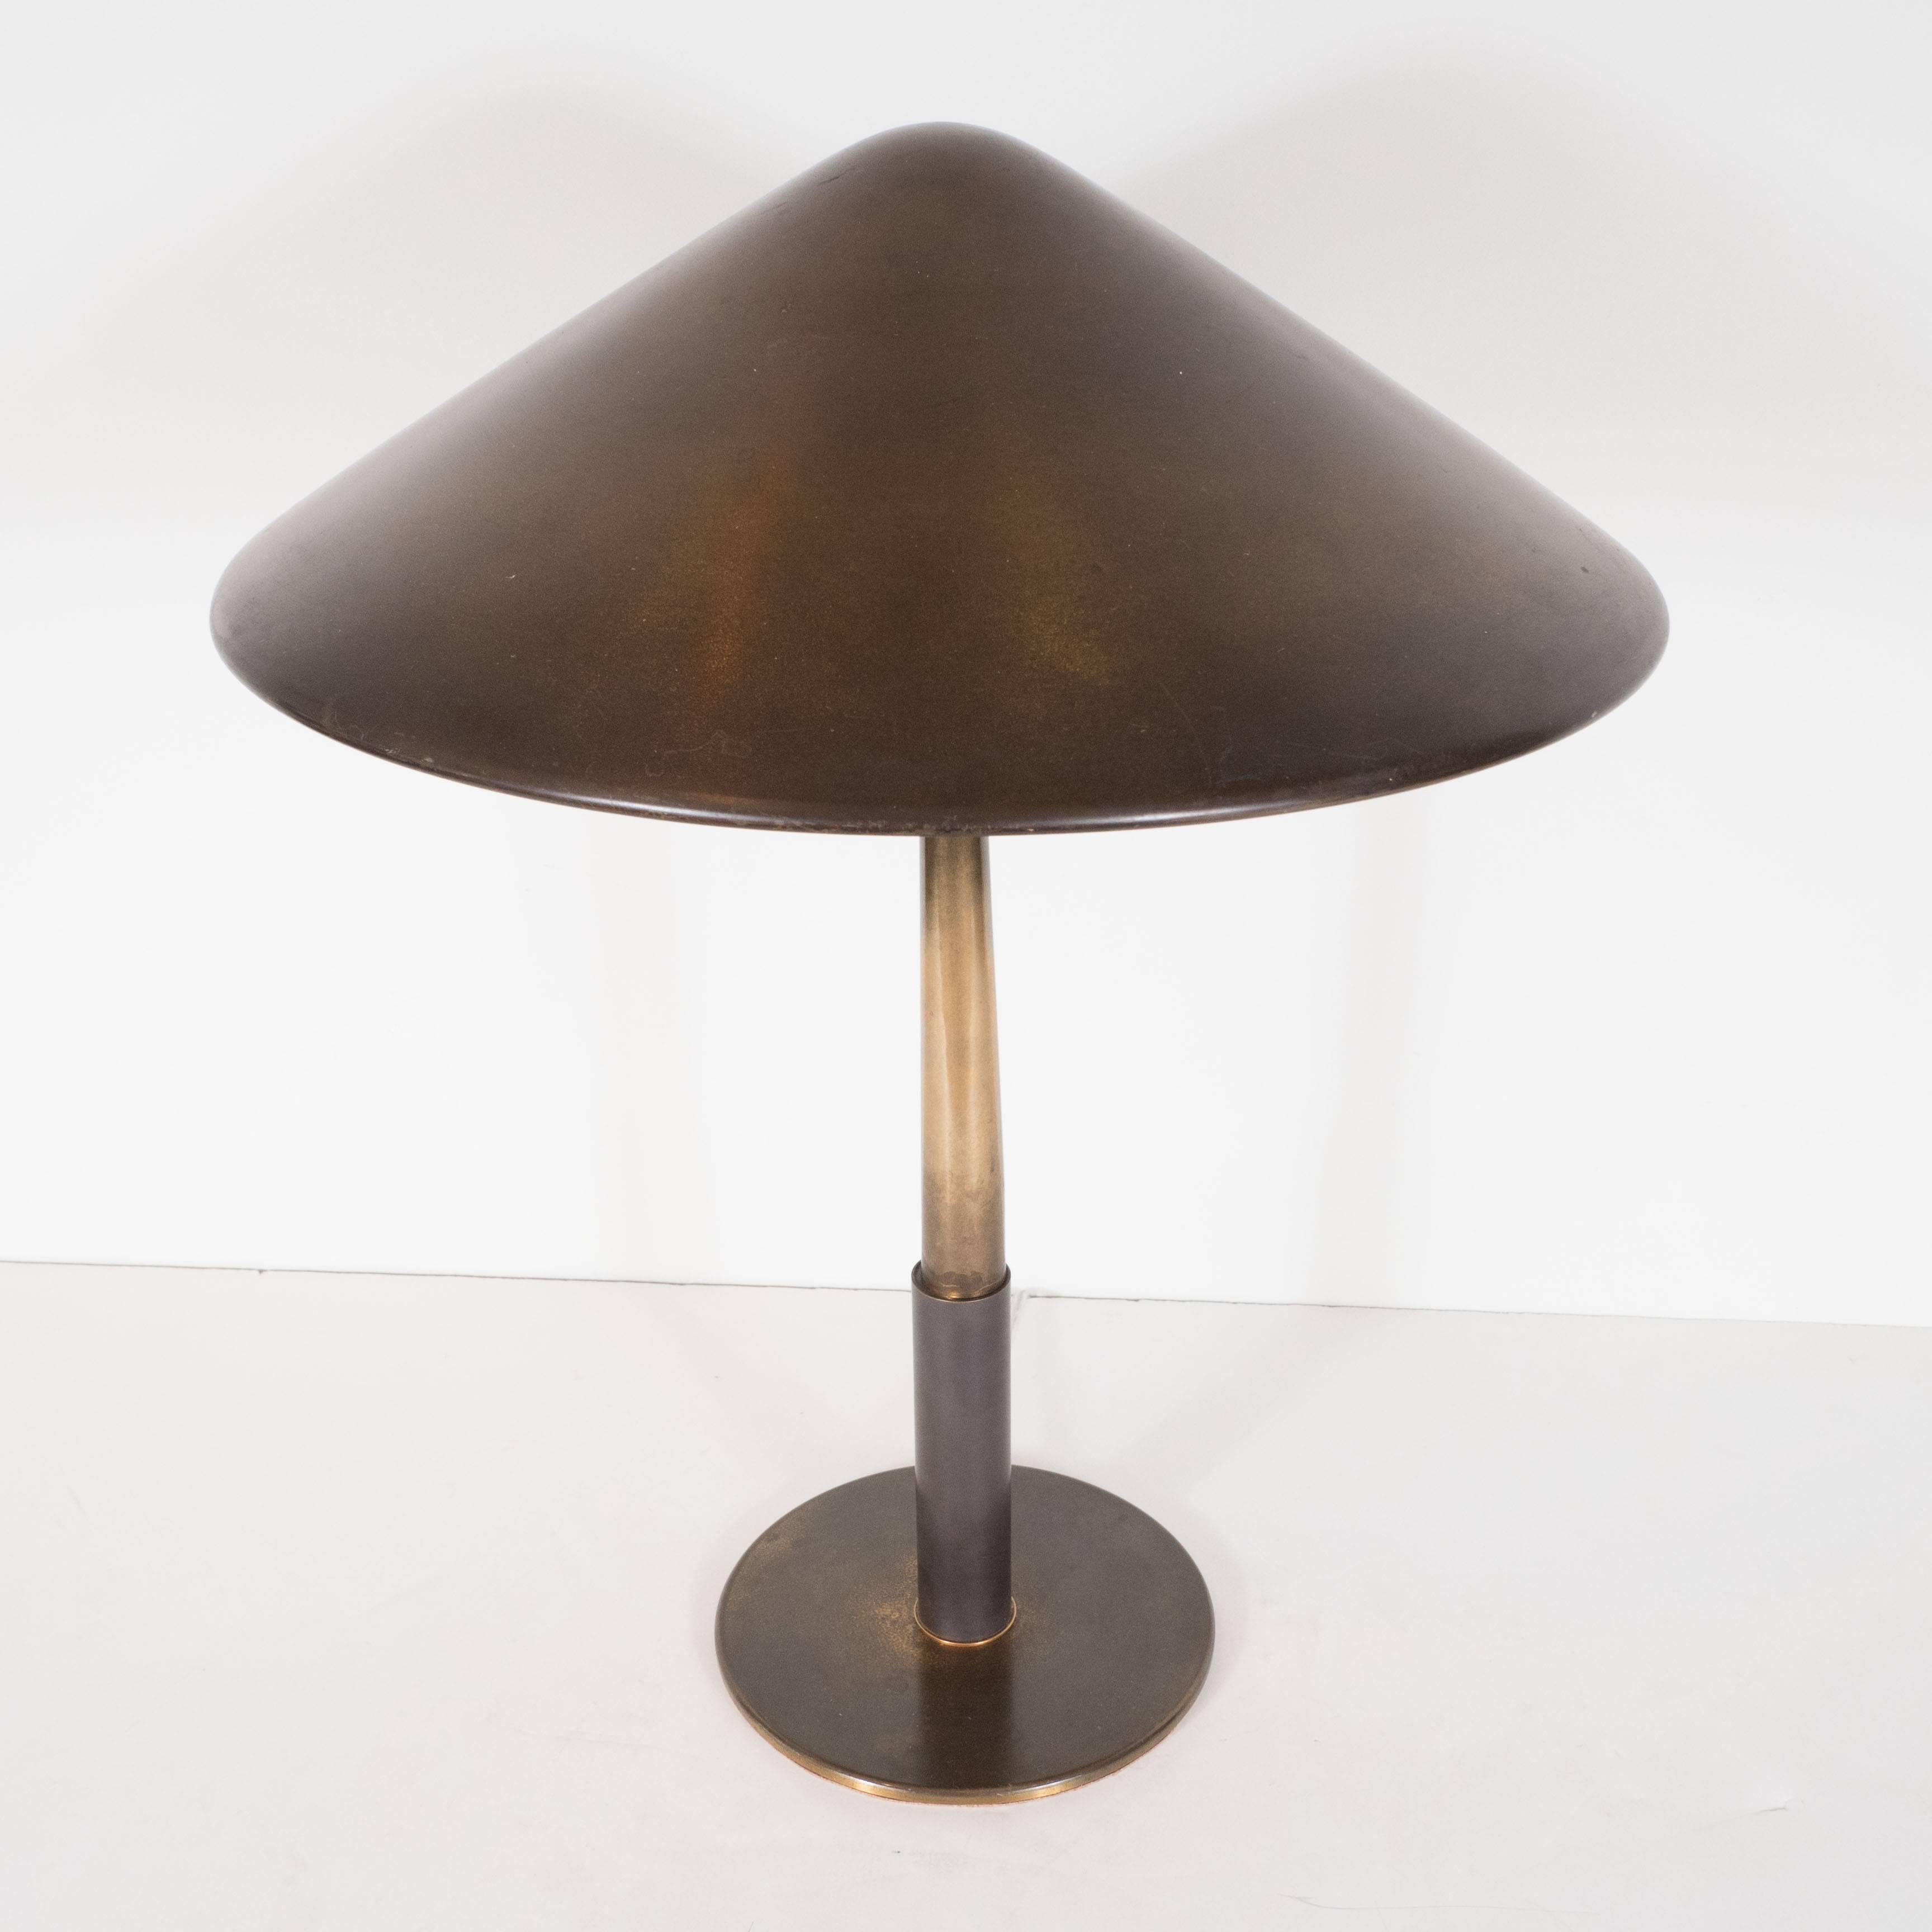 Stilnovo brass table lamp with brass shade, Italy, 1950s.